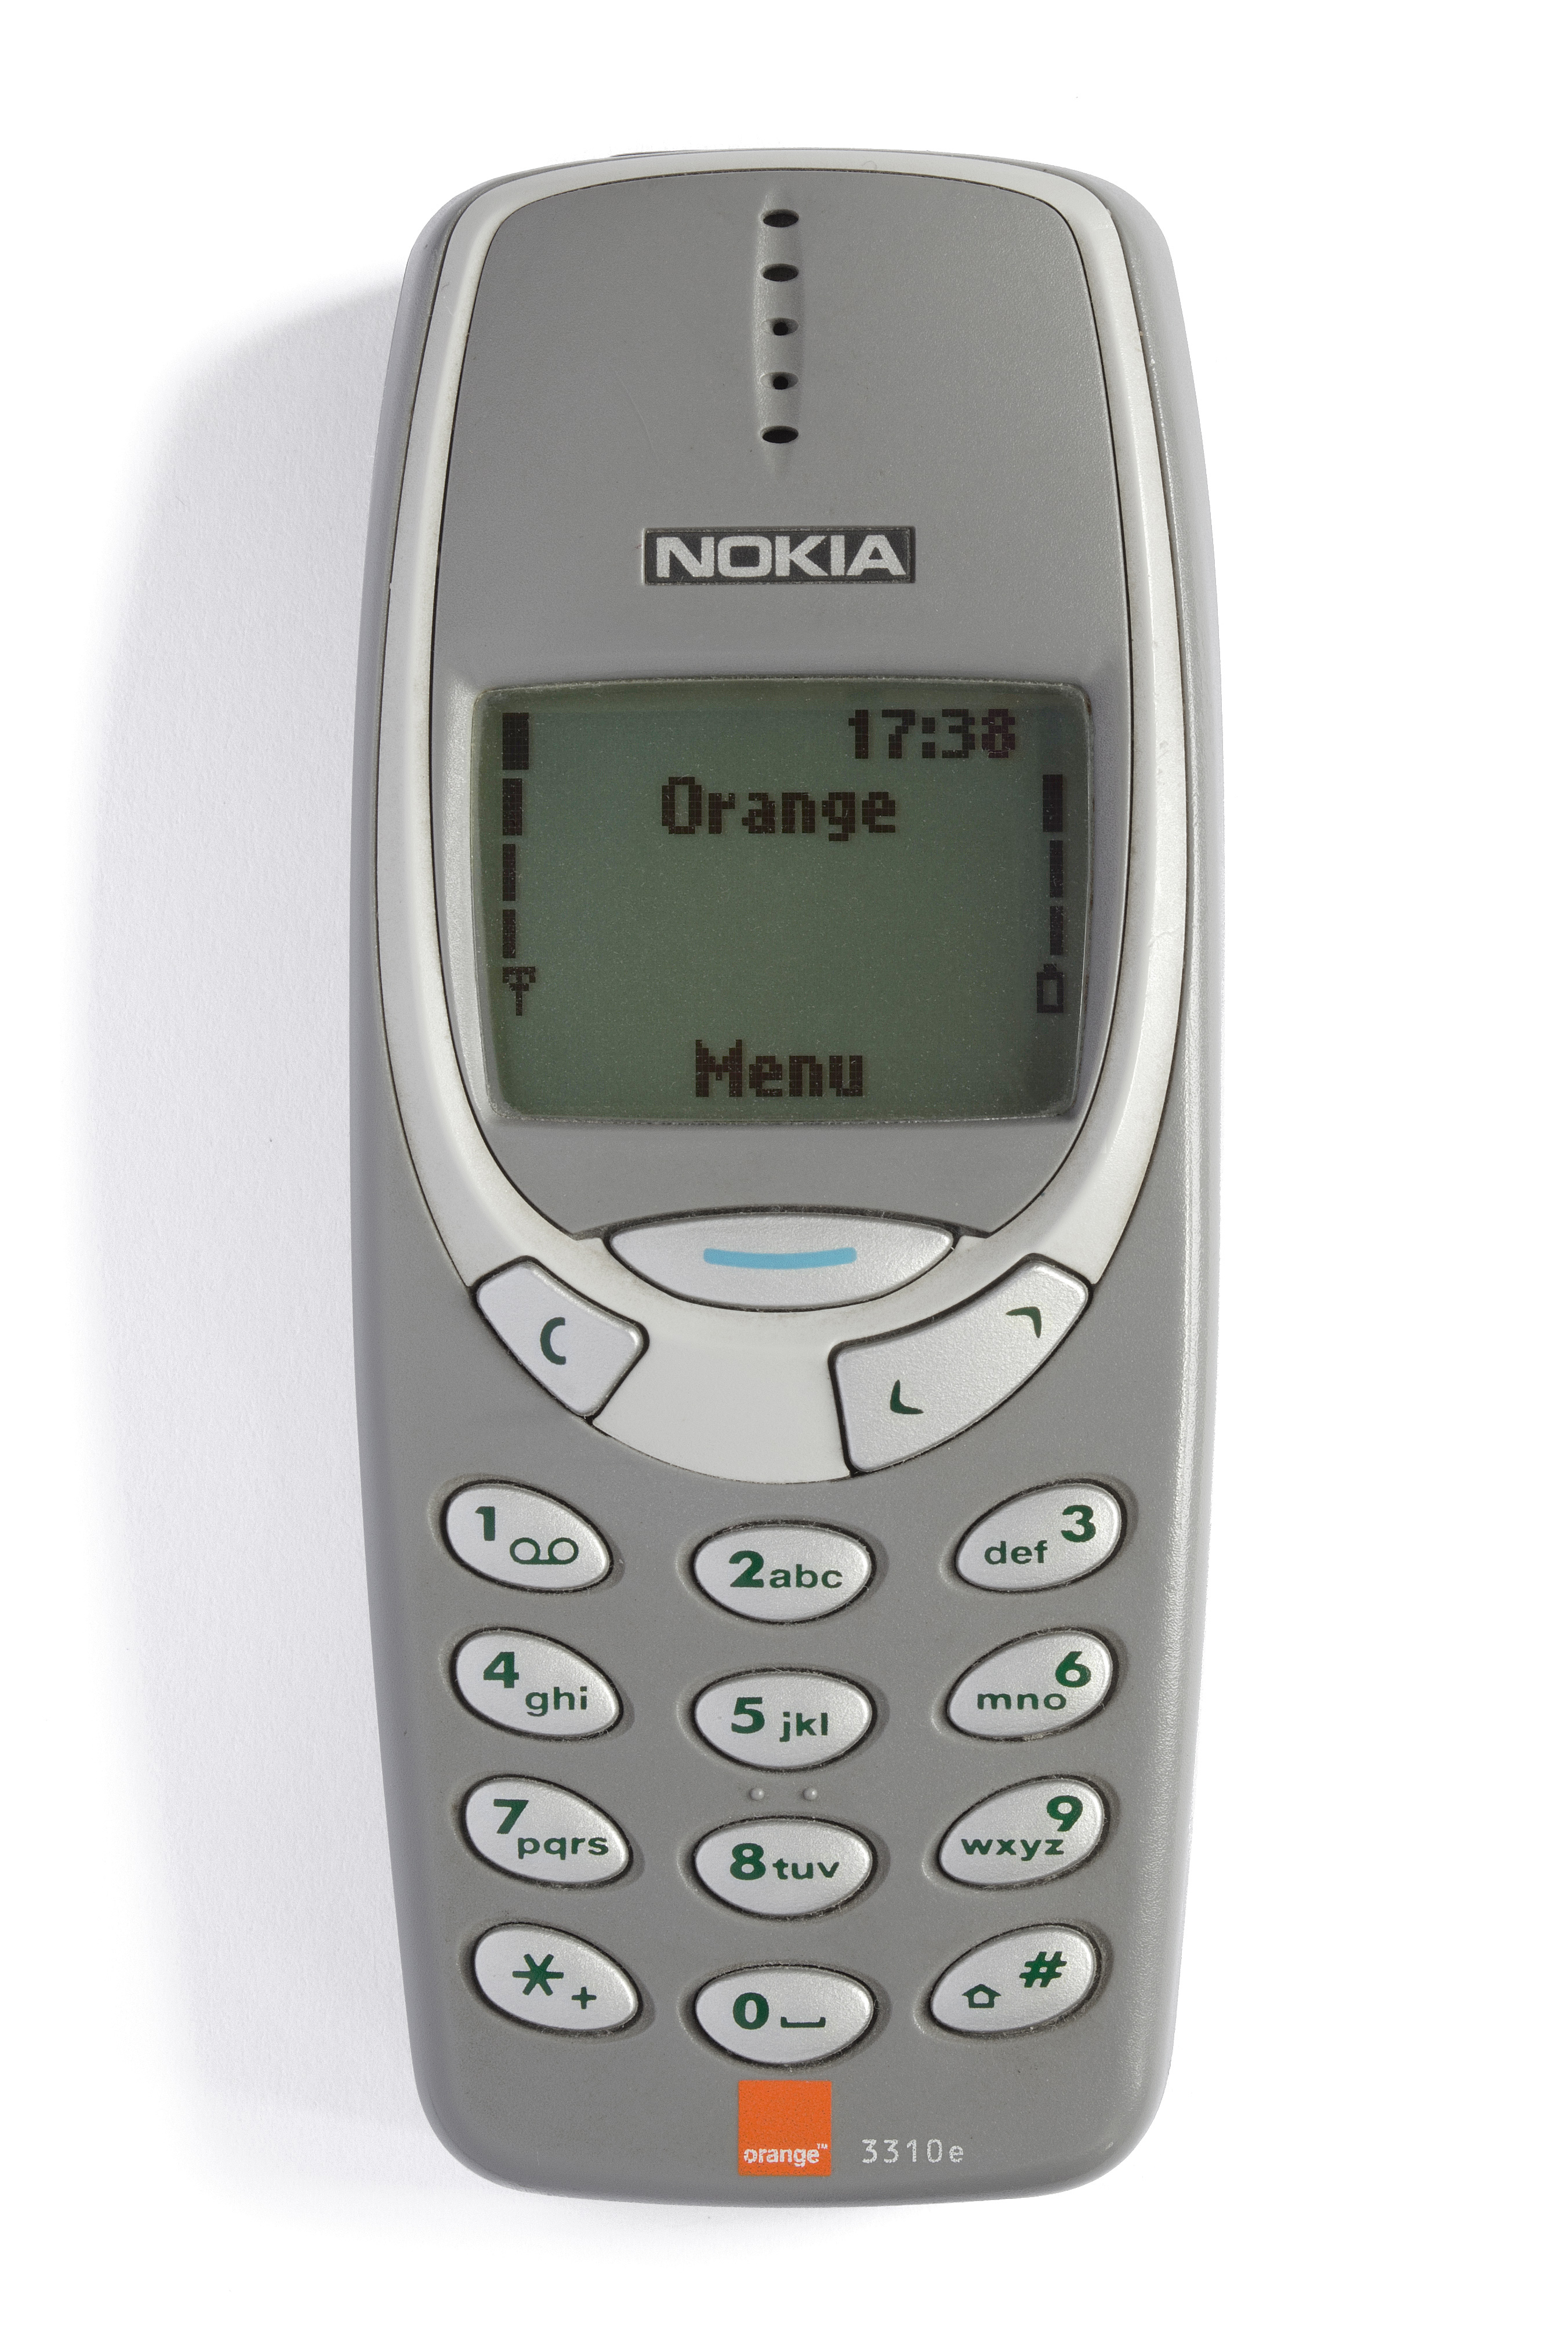 Nokia 3310 grey front (tidied and enhanced)